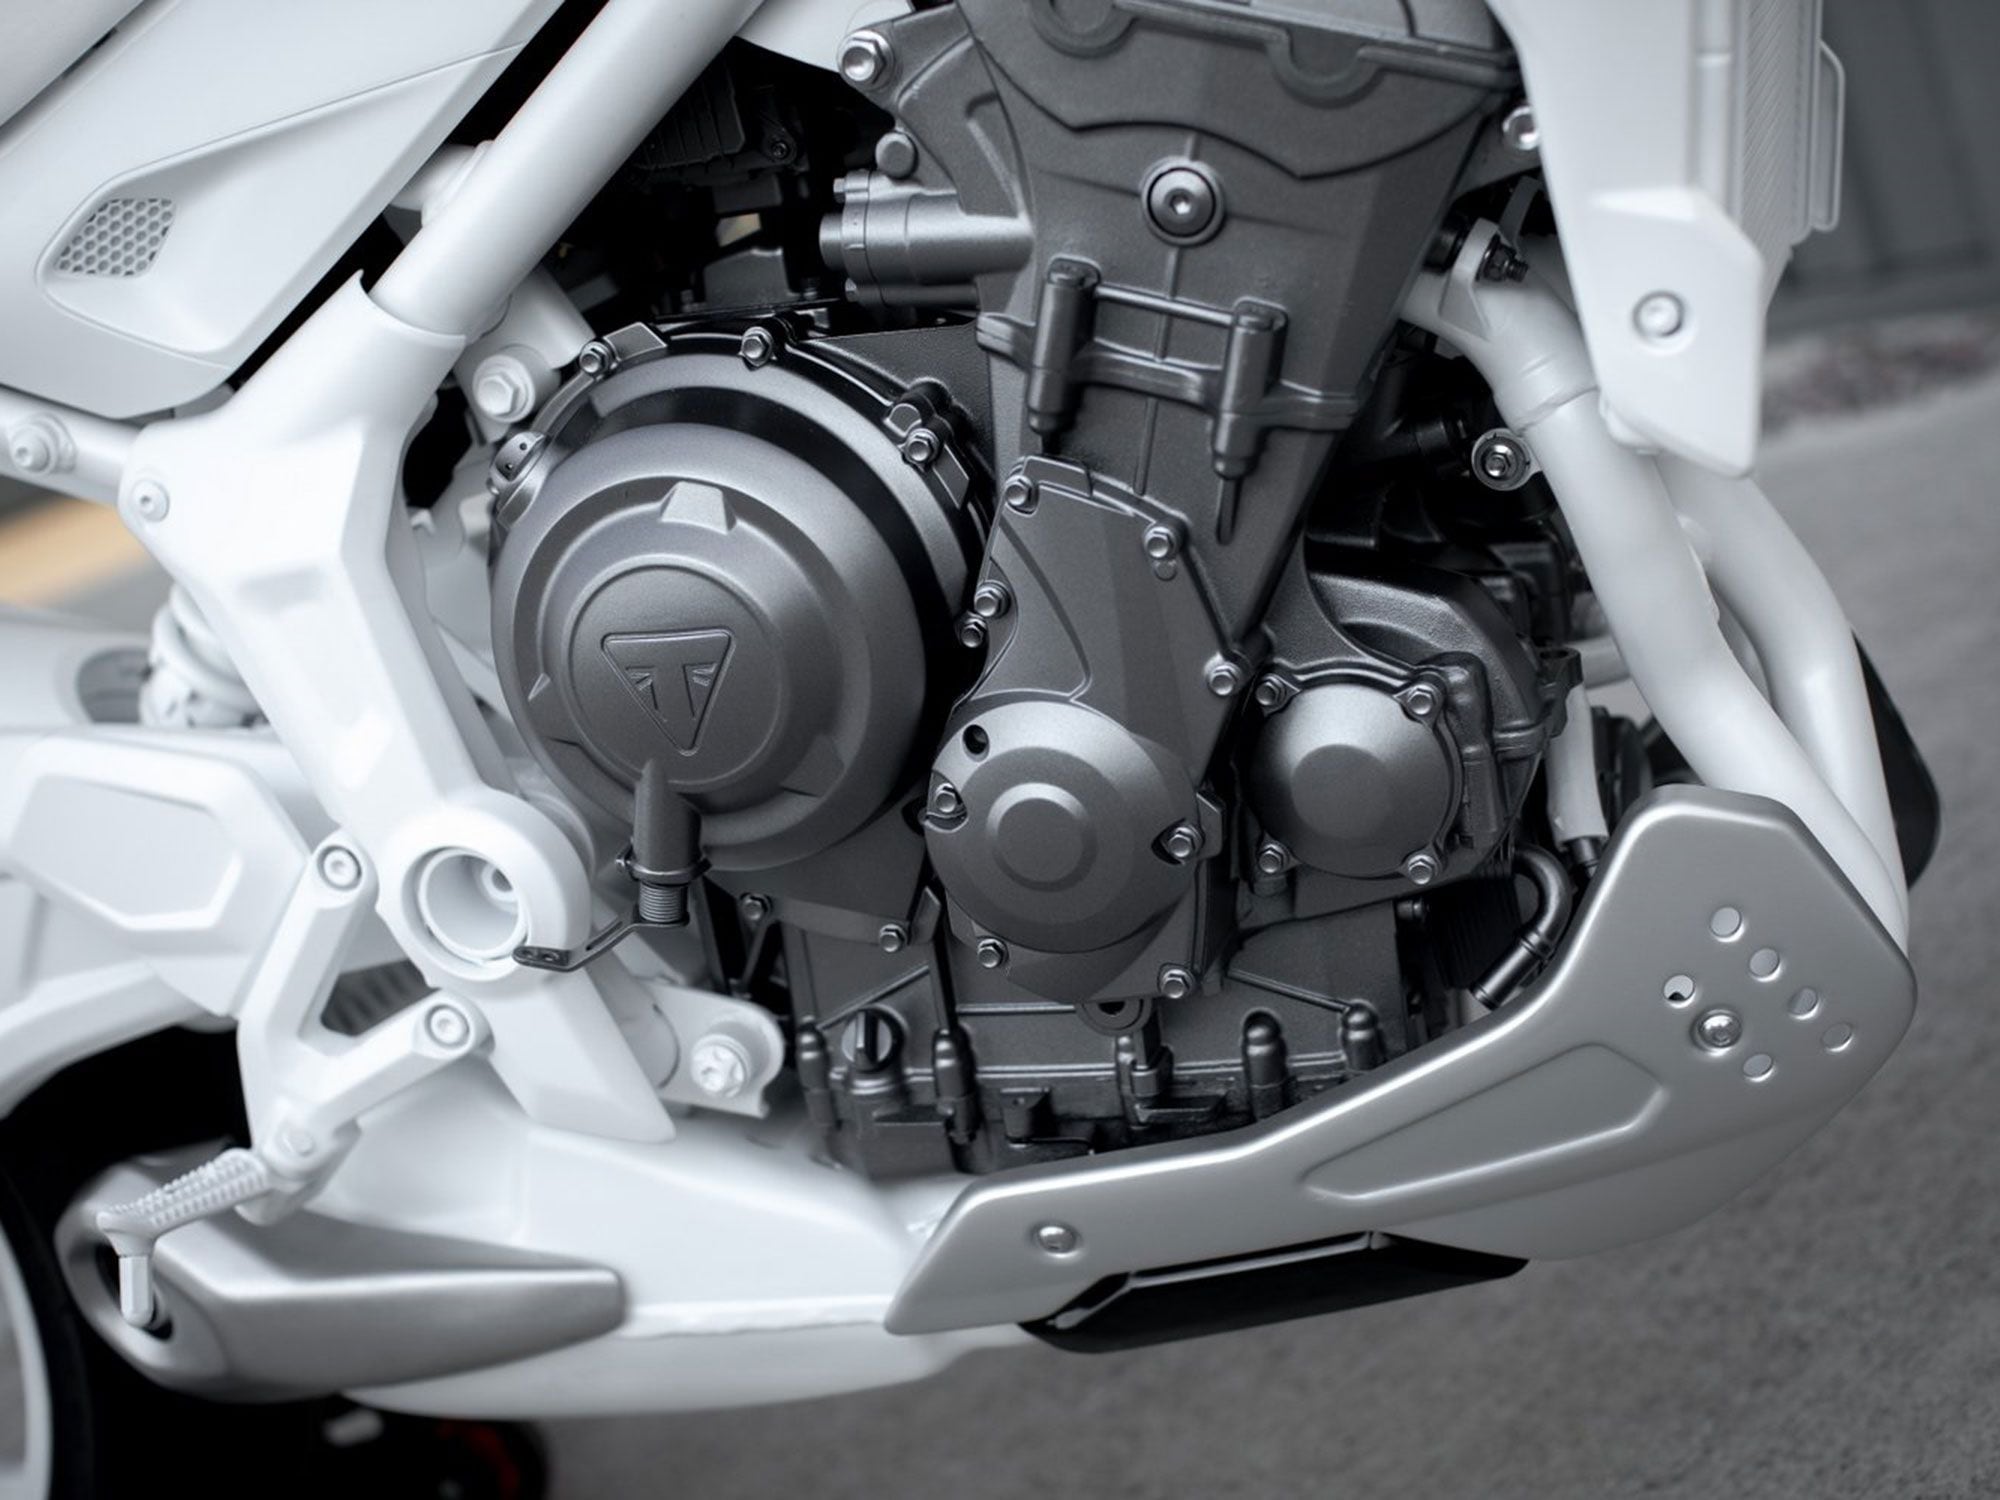 While engine displacement has yet to be confirmed, the smallish triple new bike’s engine may be similar to the powerplant used in the new Street Triple—or even smaller.